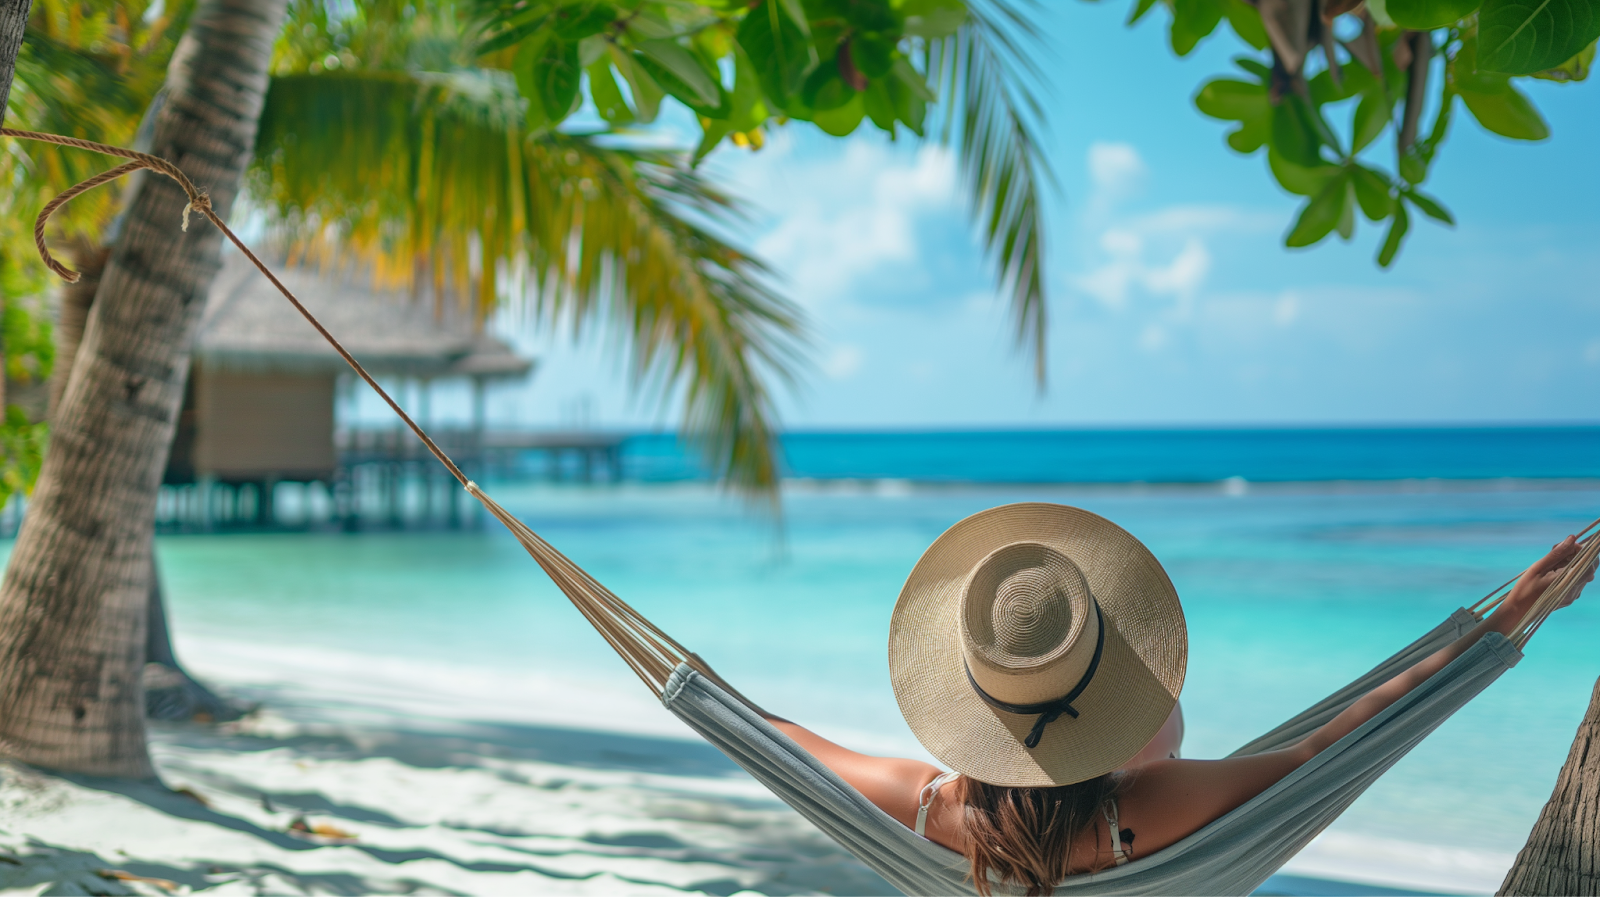 A closeup of a female visitor relaxing in a hammock in the Maldives enjoying the peaceful off-season atmosphere